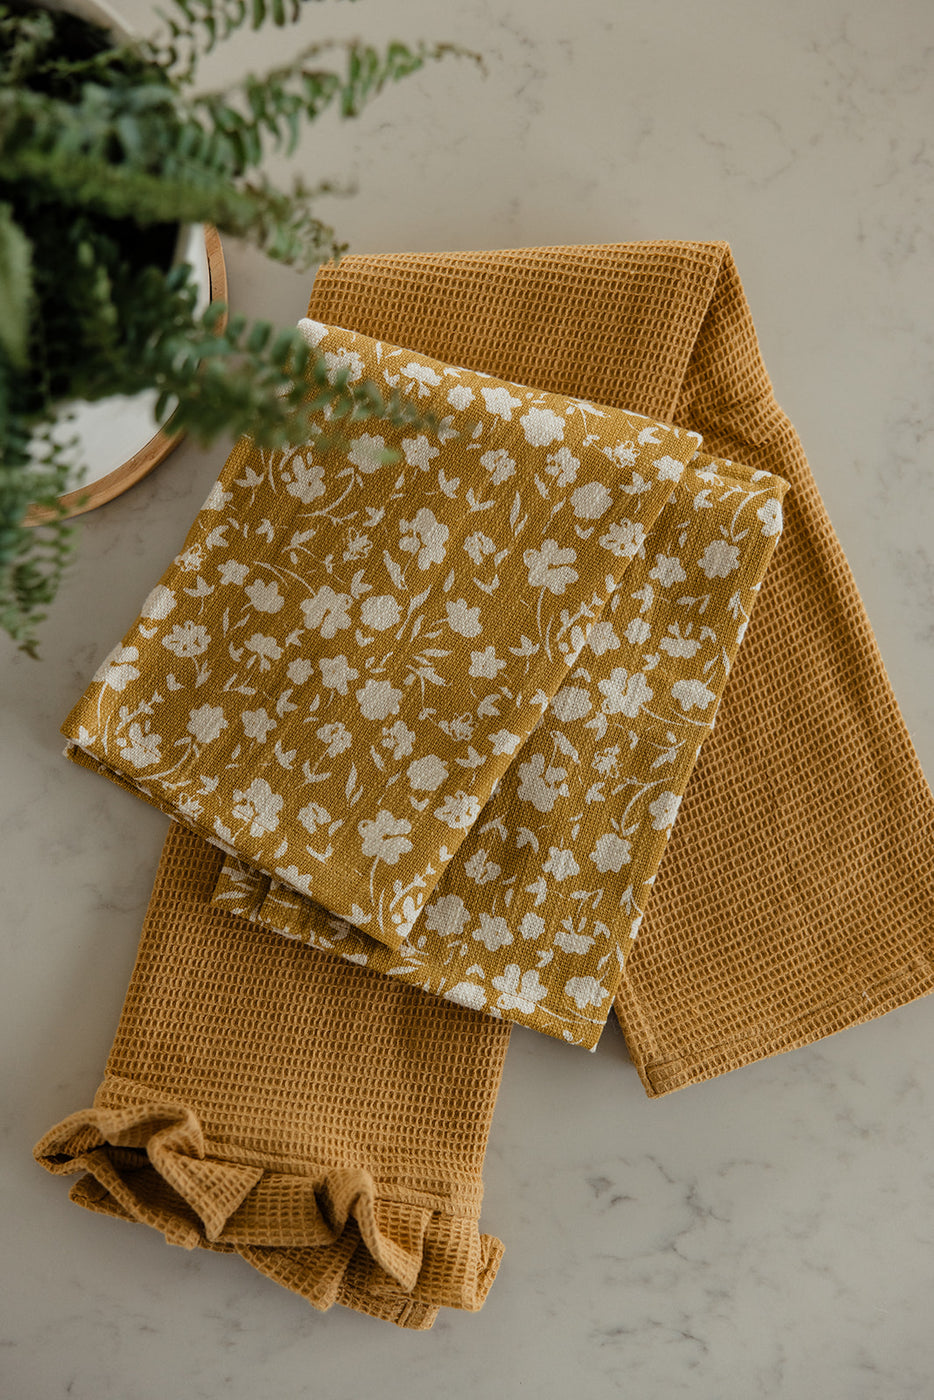 a folded yellow towel with white flowers on it